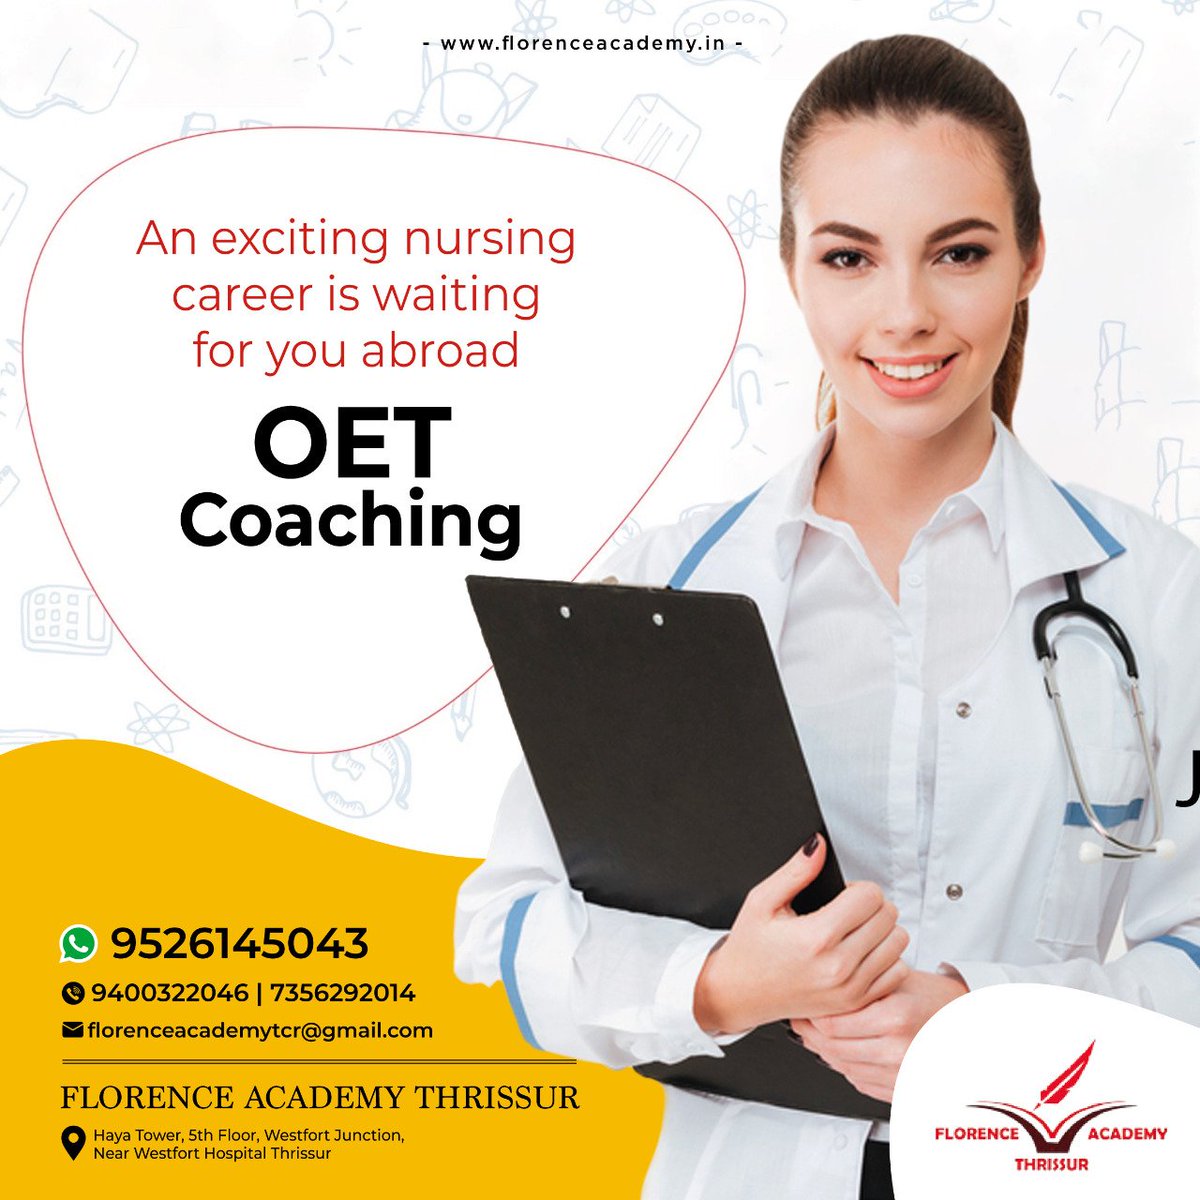 Need a better OET carrier? We are the best coaching facility for your OET career.

#study #help #online #coaching #oetexam #oet #oetonlinecoaching #oetonlineclasses  #oetresults #oetinstitute #oetinstituteindia #success #oetpreparation  #FlorenceAcademy #study #help #online